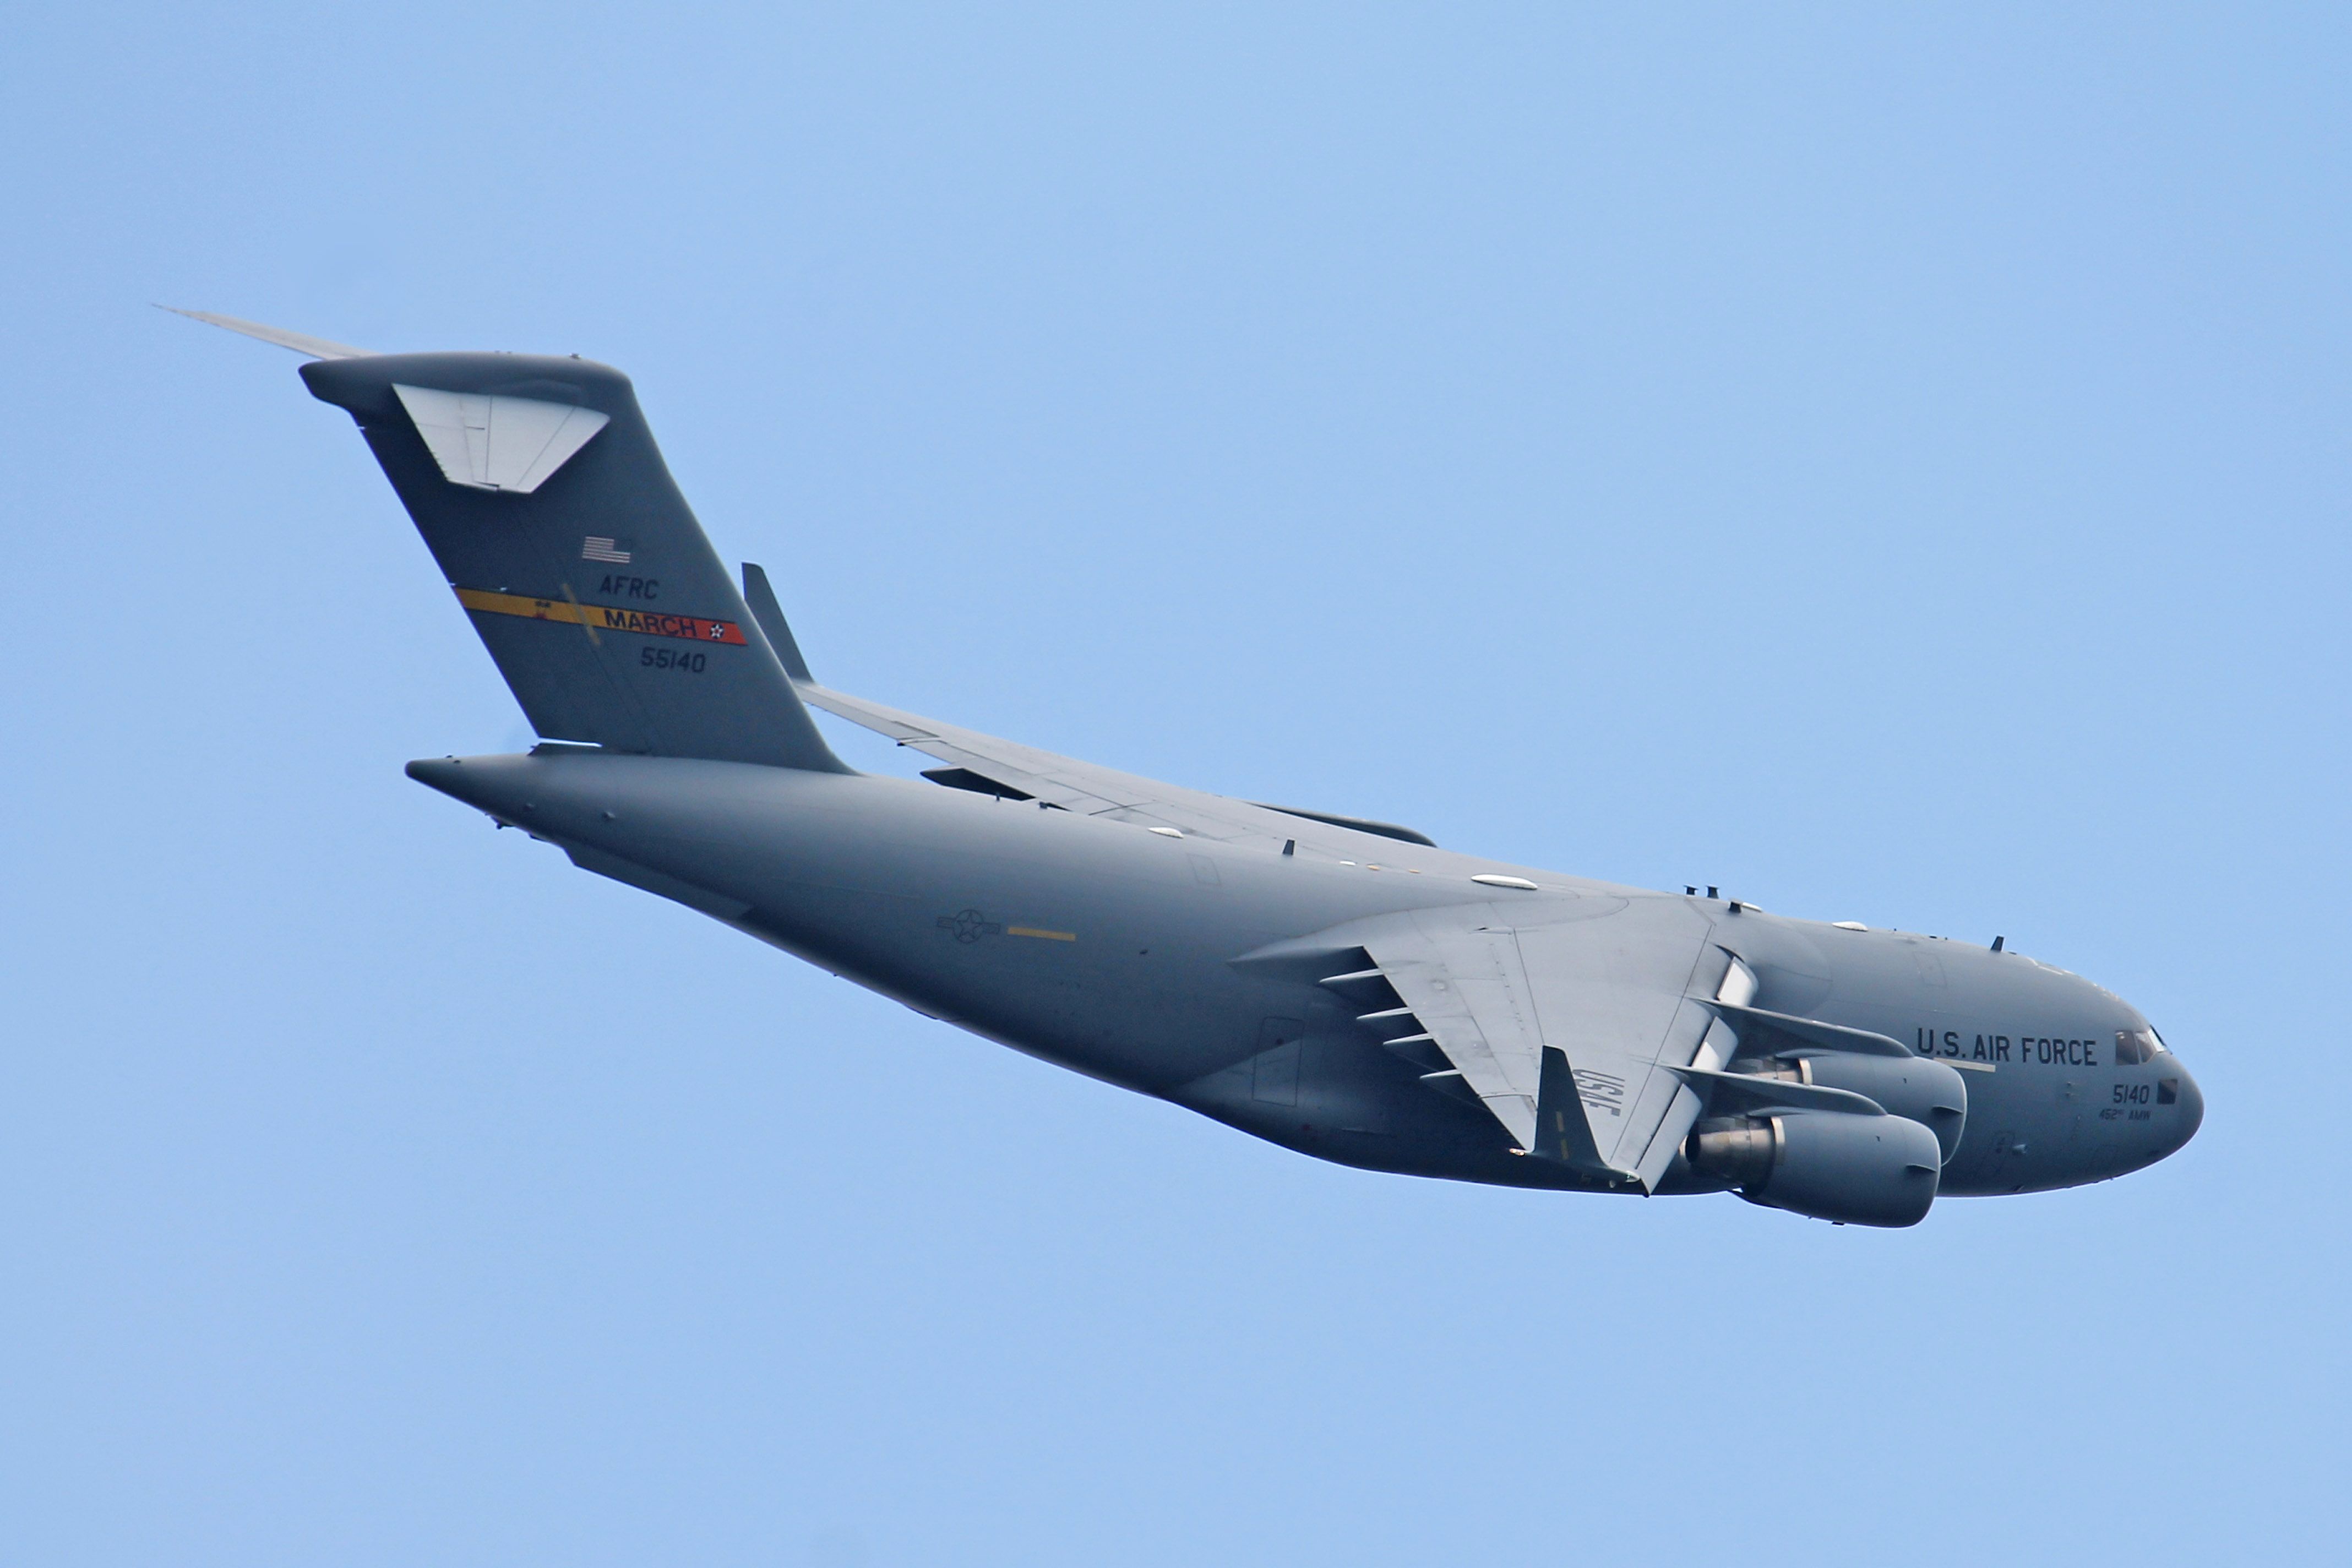 Boeing Globemaster III (05-5140) - A C-17 (05-5140, c/n P140) carrying fire apparatus passes over Sparta/Fort McCoy Airport before landing on 15 July 2013.